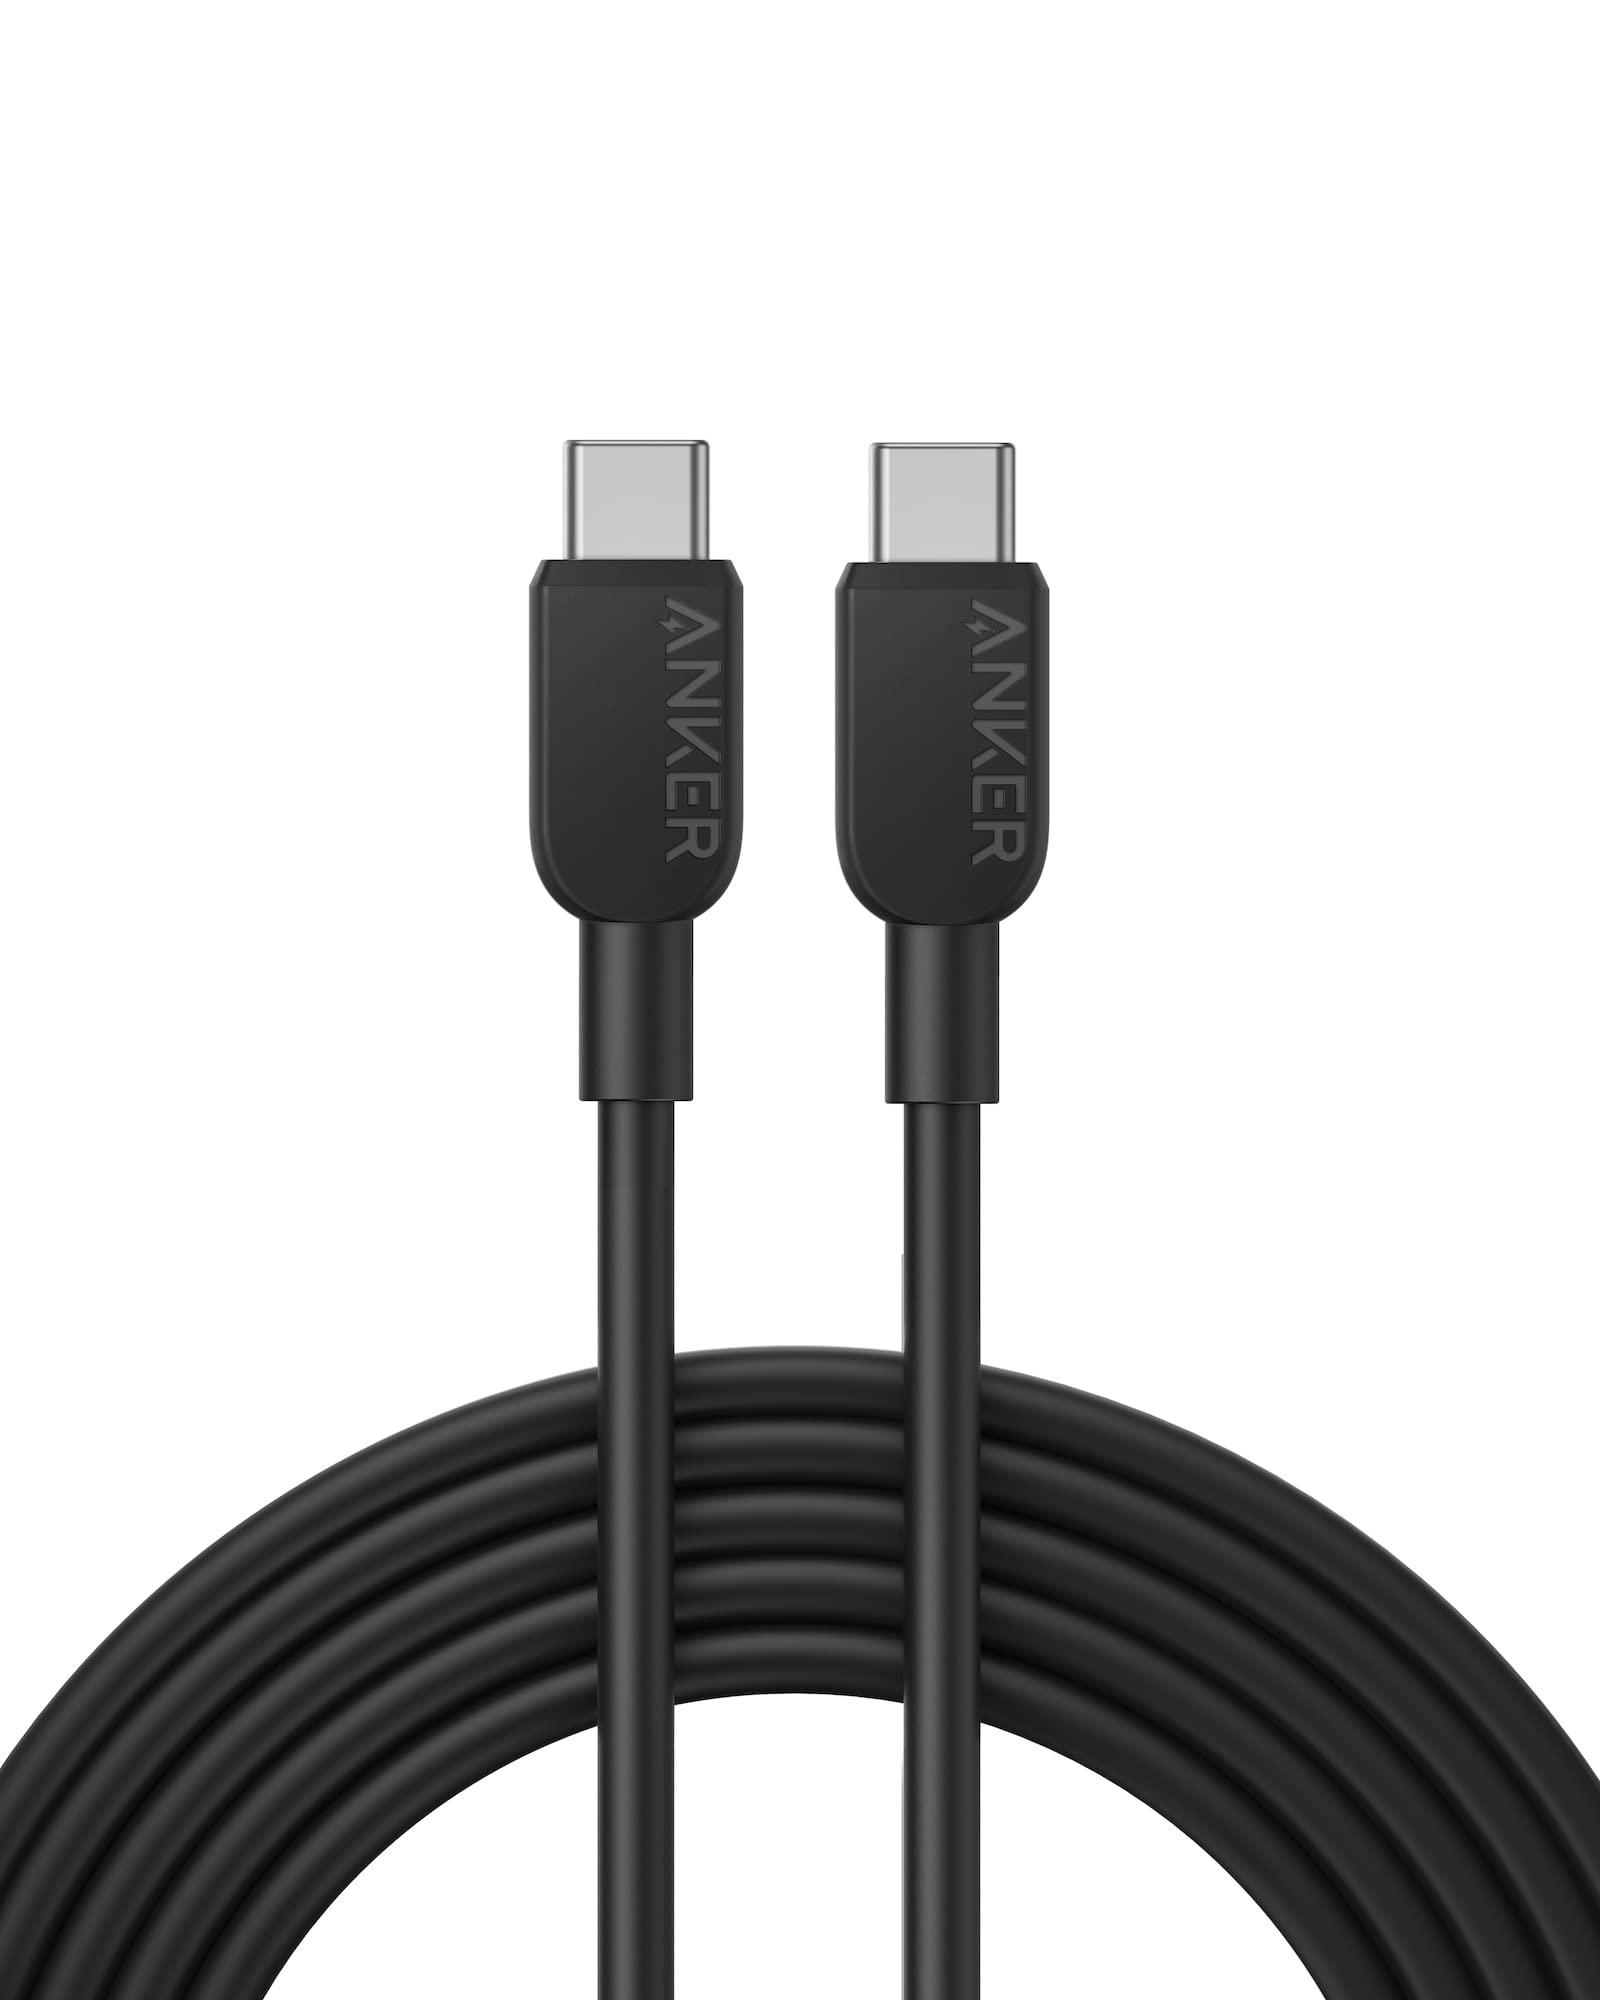 Anker Play Anker USB C Cable, 310 USB C to USB C Cable (10 ft), (60W/3A) USB C Charger Cable Fast Charge for Samsung Galaxy S23, iPad Pro 2